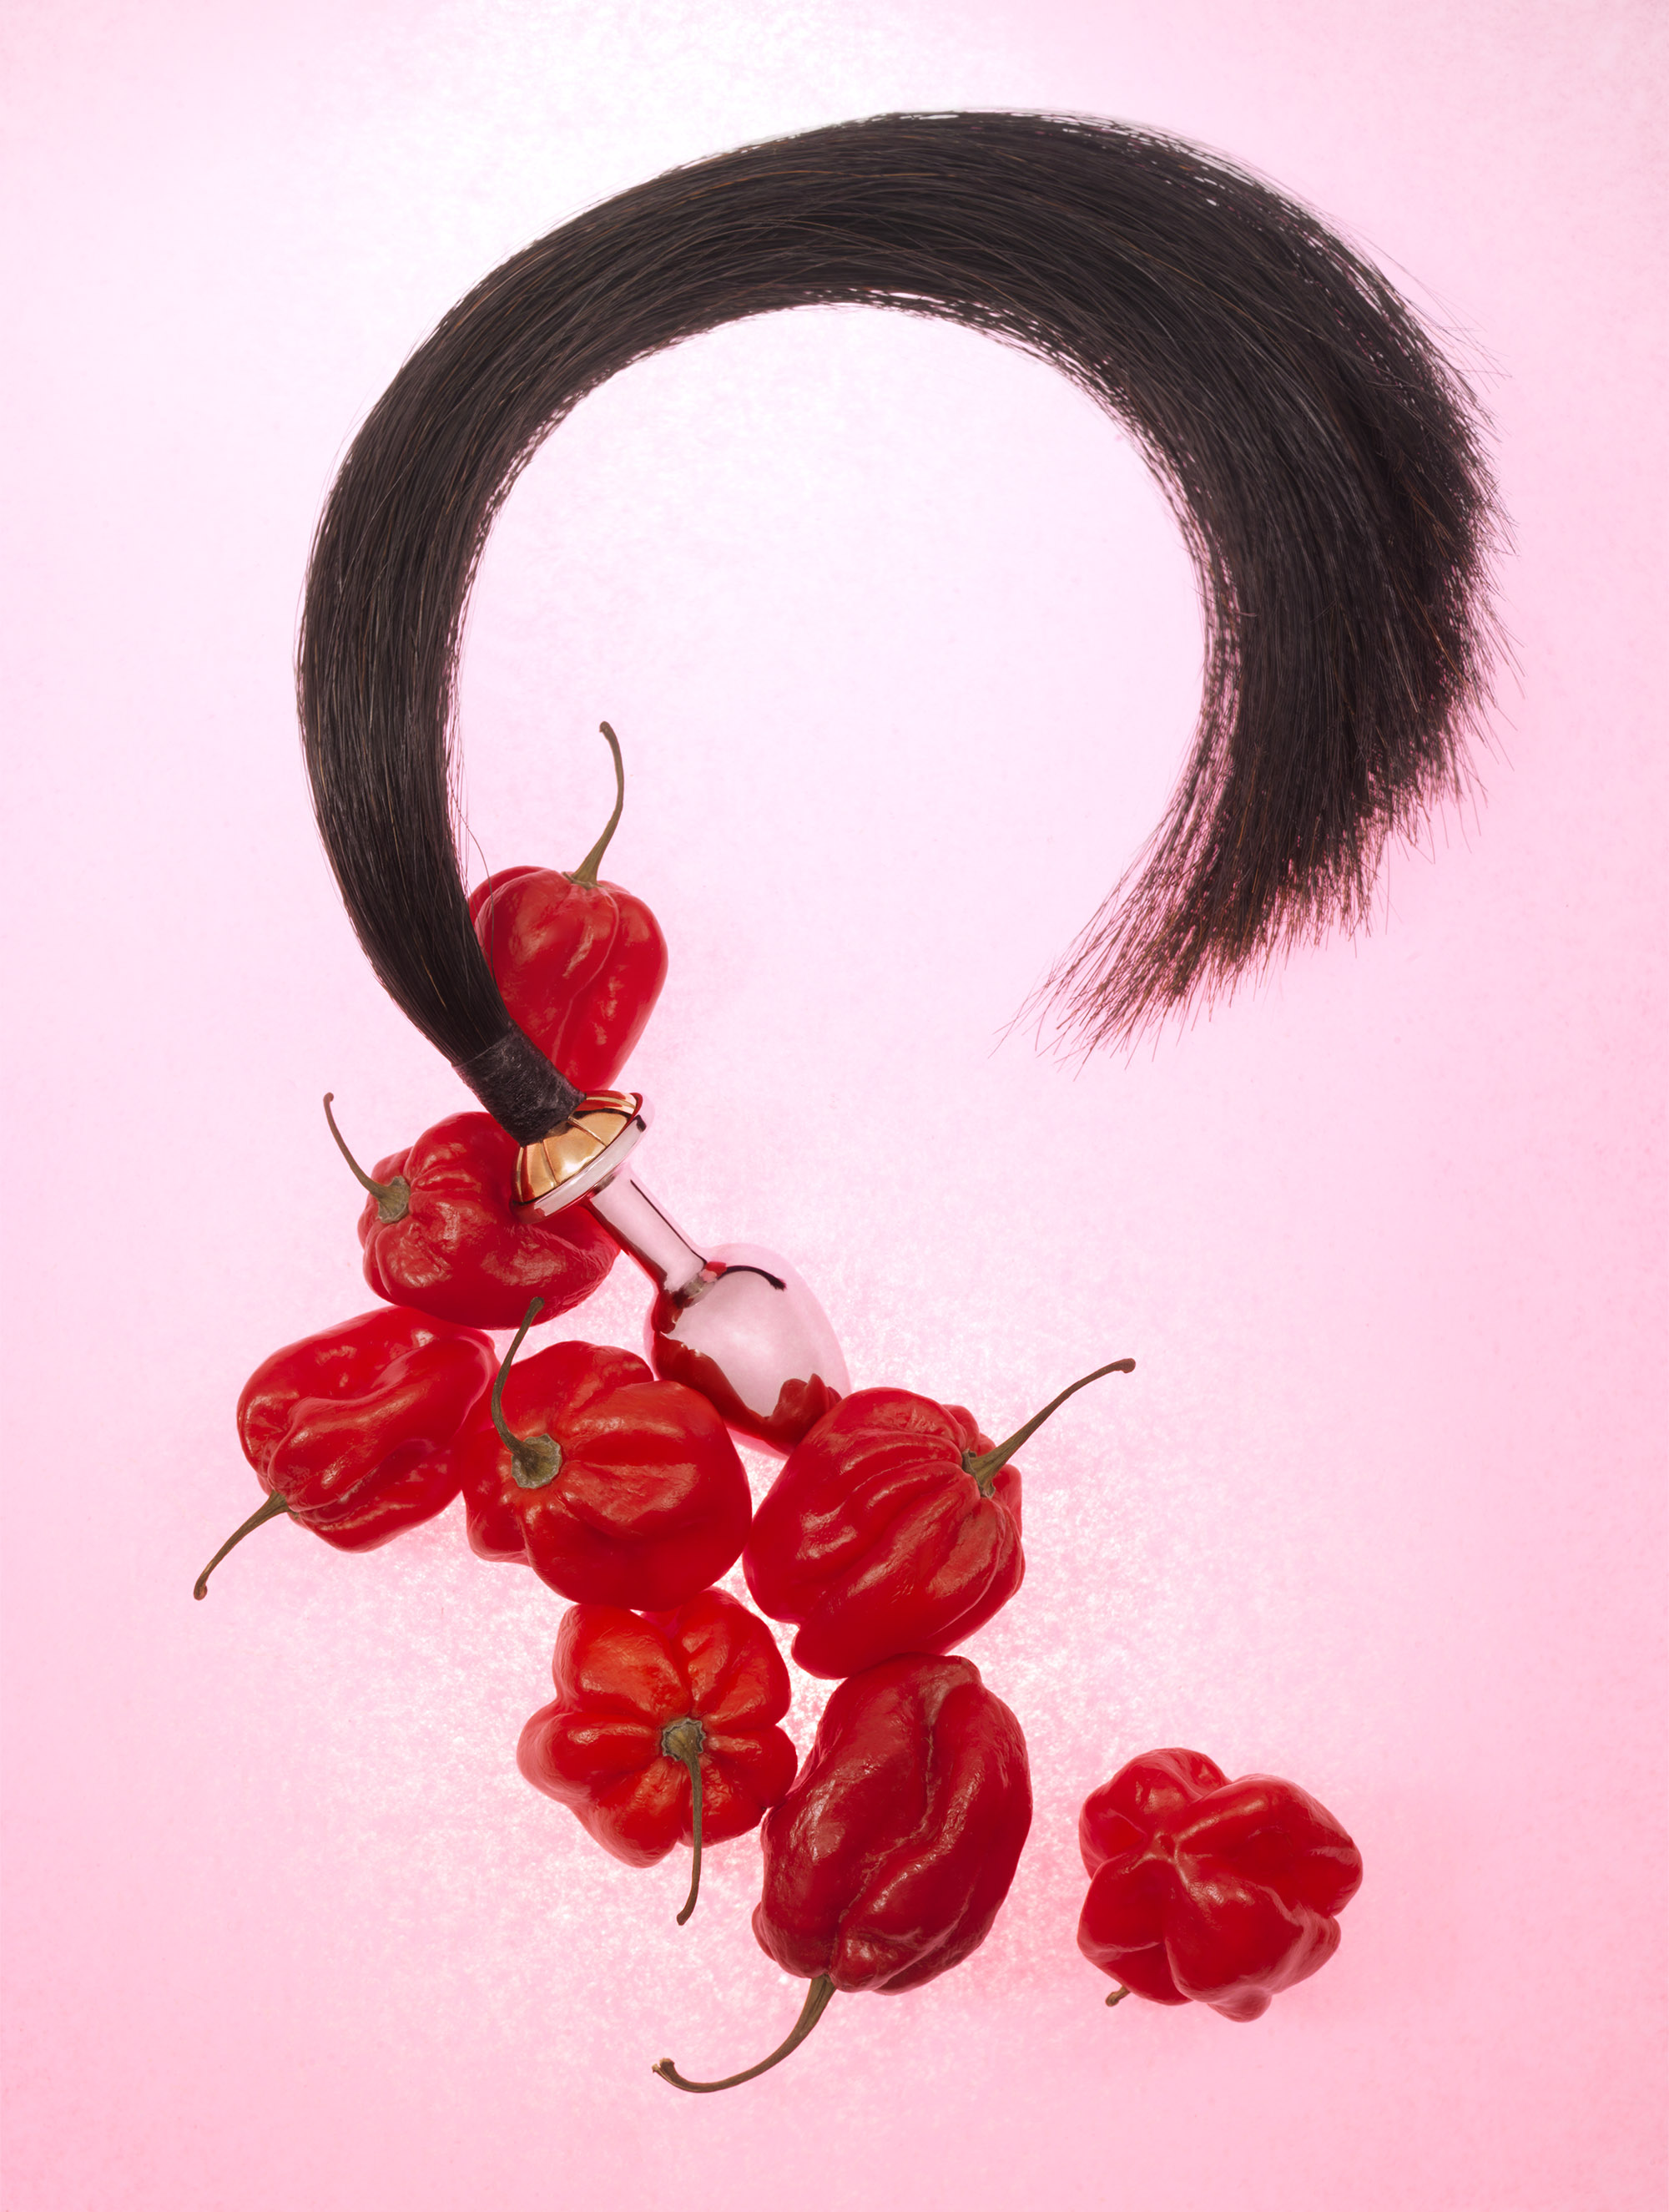 04 Fruit defendu - Editorial for Blooming Parisiennes Magazine - Tailebud horsetail by Rosebuds - Prod Zoe Hayes